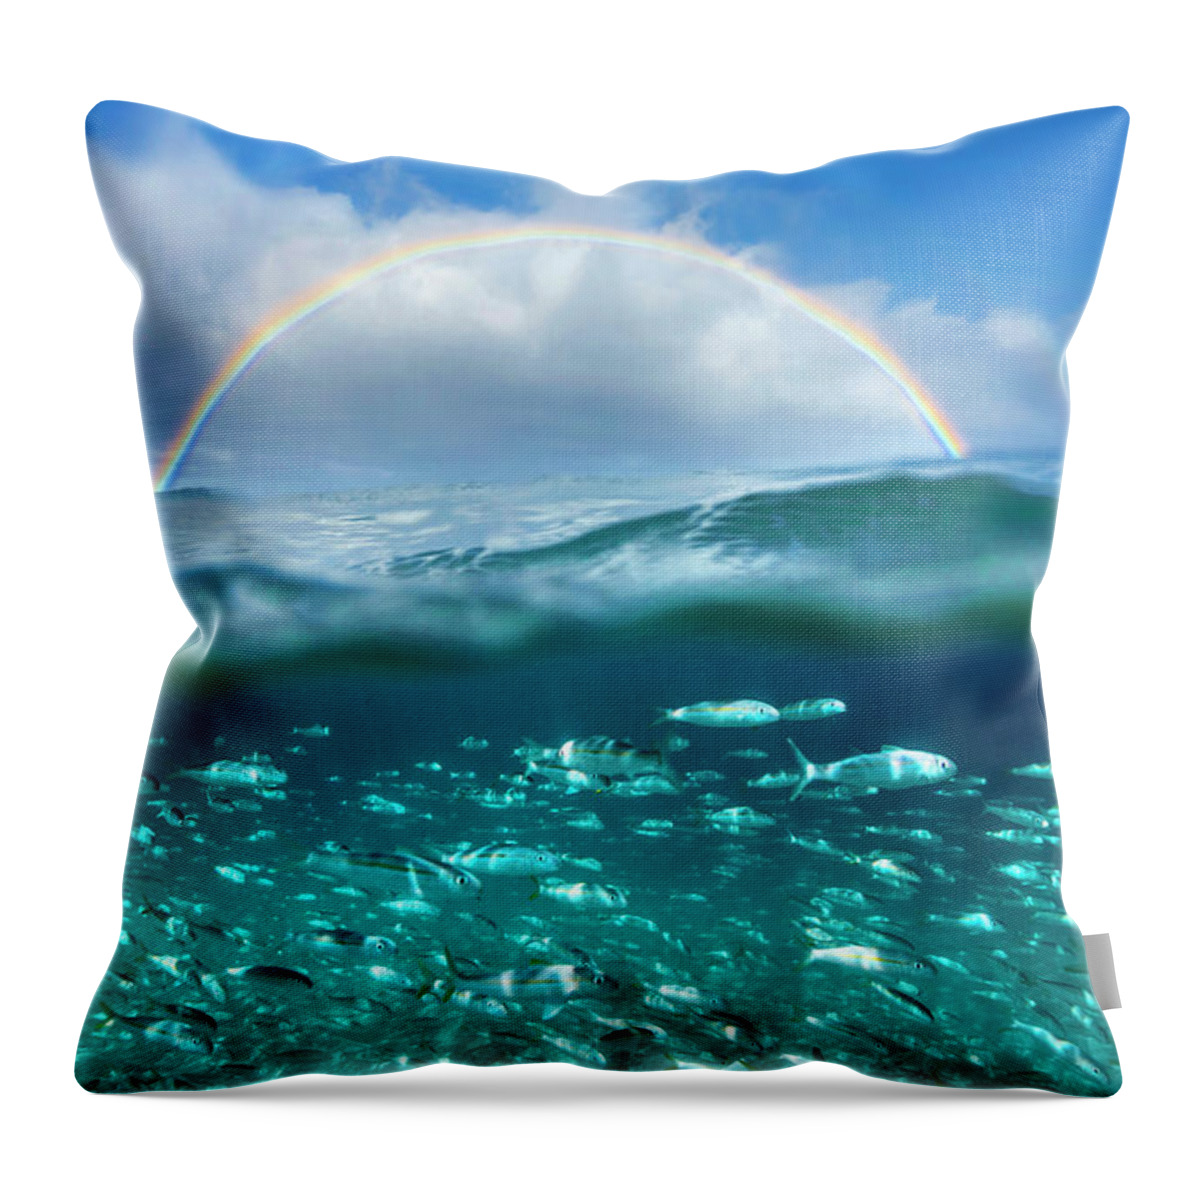  Sea Throw Pillow featuring the photograph Under the Rainbow by Sean Davey